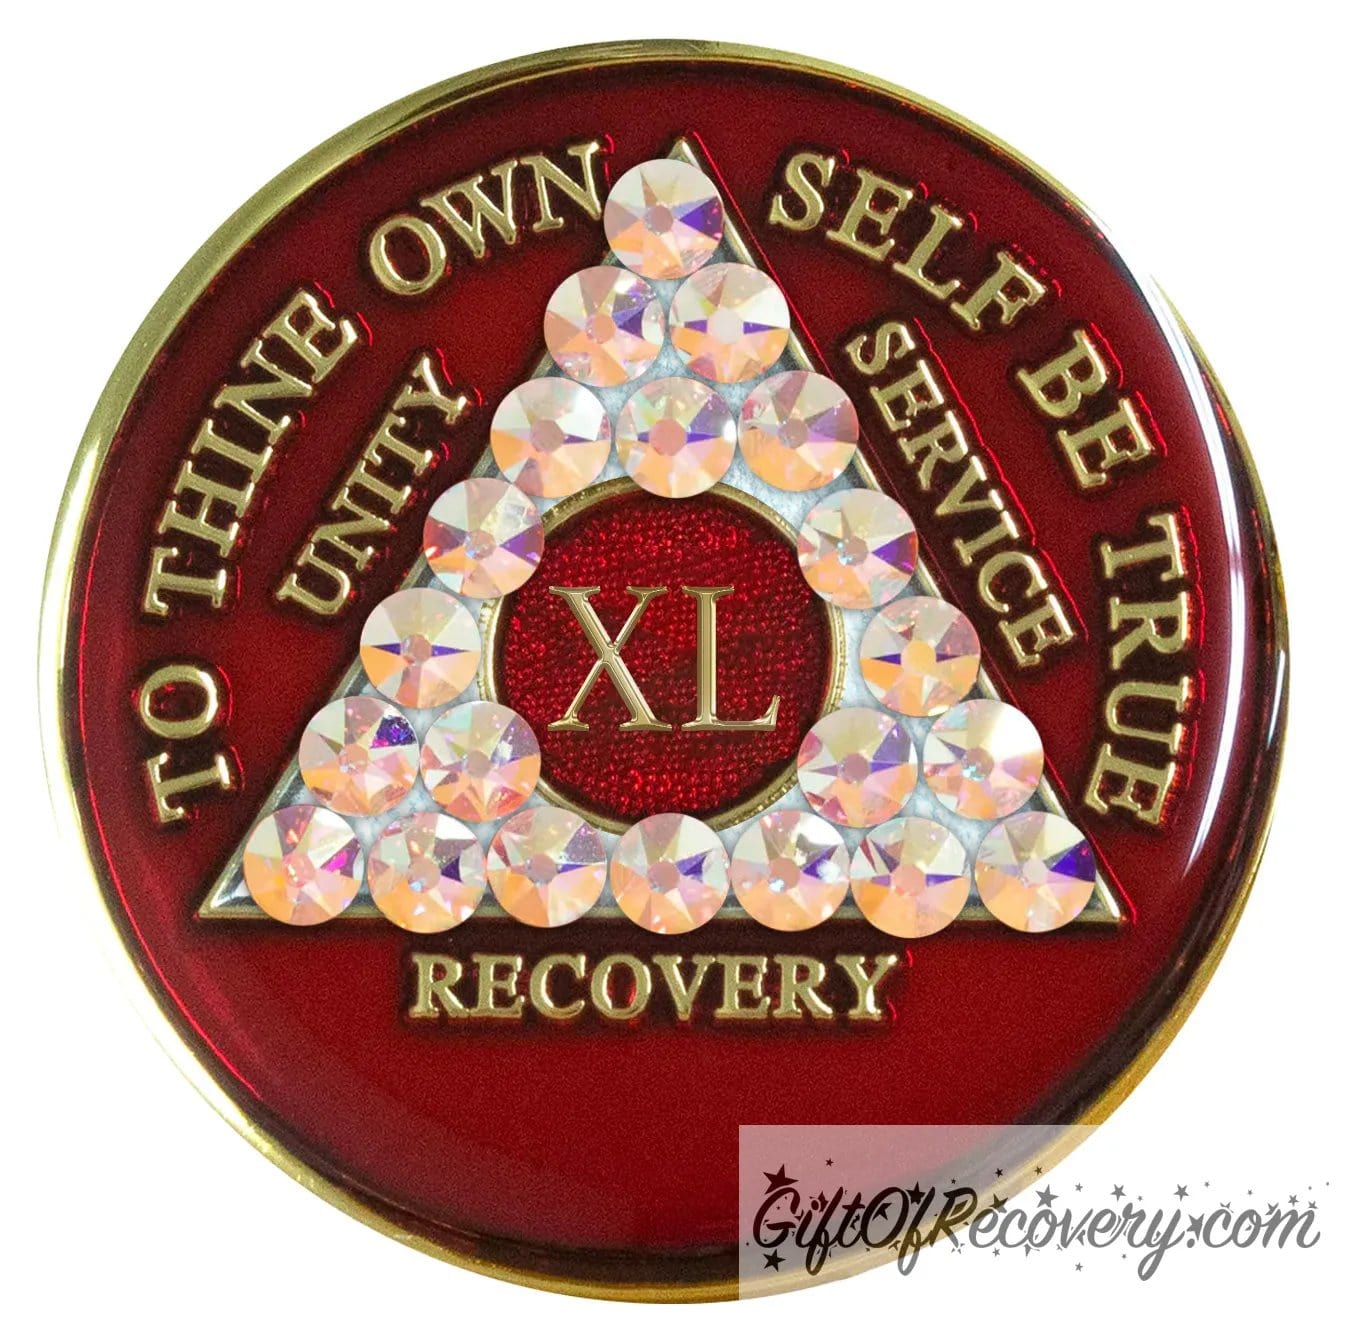 40 year AA medallion ruby red with 21 Aurora Borealis genuine crystals in the shape of the triangle and to thine own self be true, unity, service, recovery, and roman numeral are embossed with 14k gold-plated brass, the medallion is sealed with resin for a shiny finish that lasts.